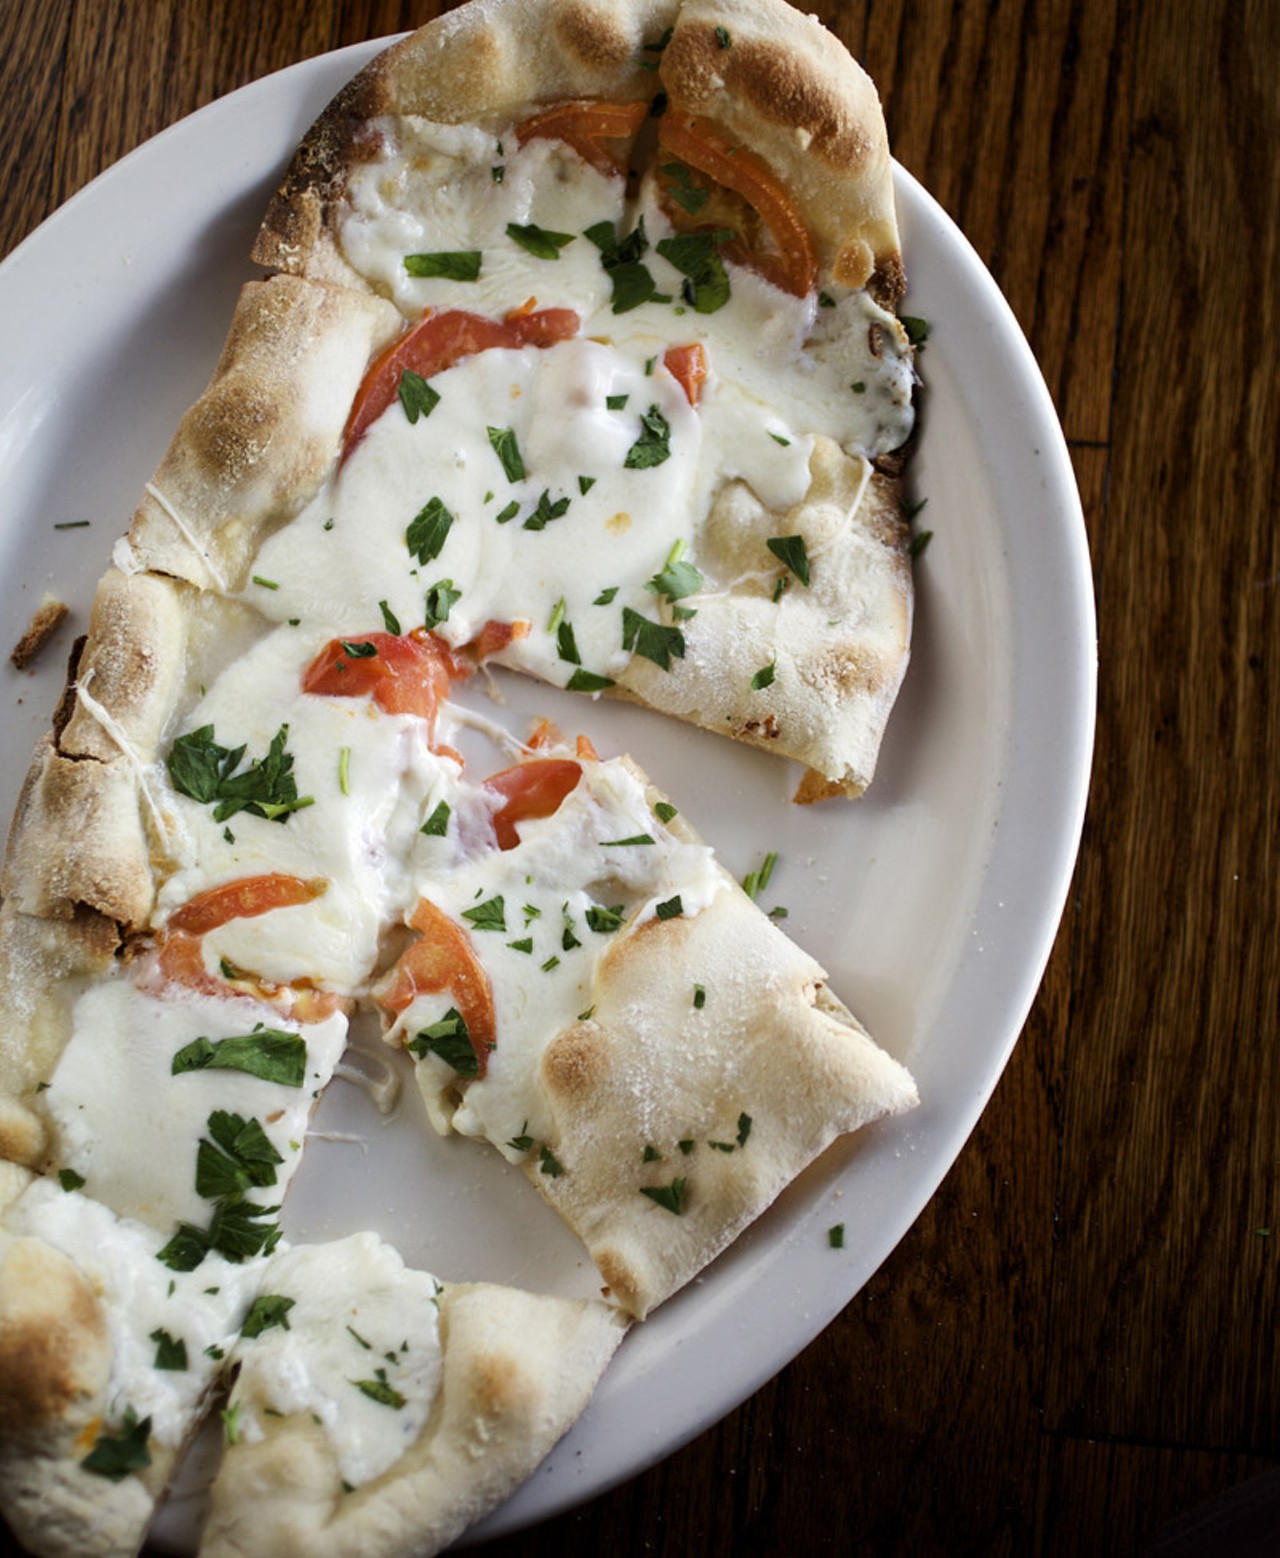 Caprese flatbread - stone baked flatbread topped with fresh tomatoes, mozzarella and basil, also available on both the regular and late night menus.